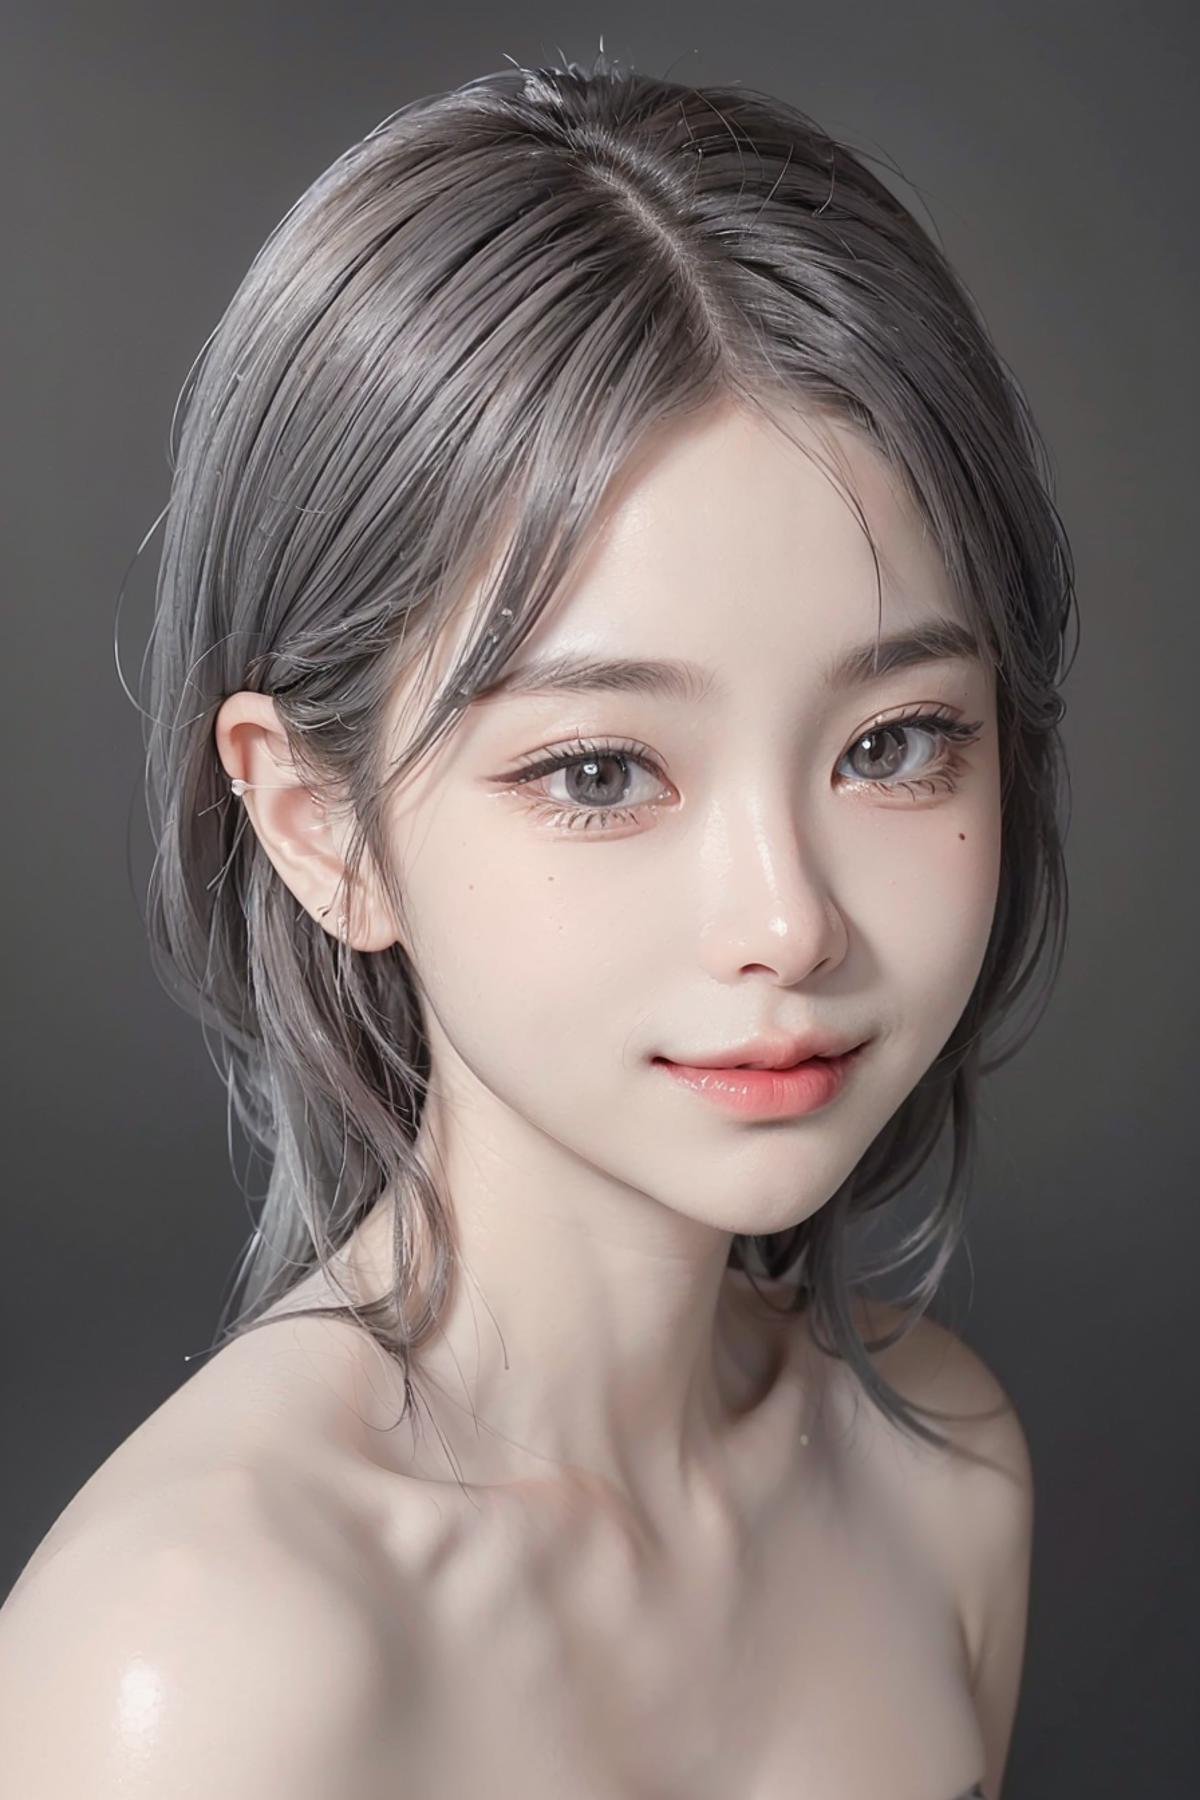 AI model image by Steven_Rogers_TH